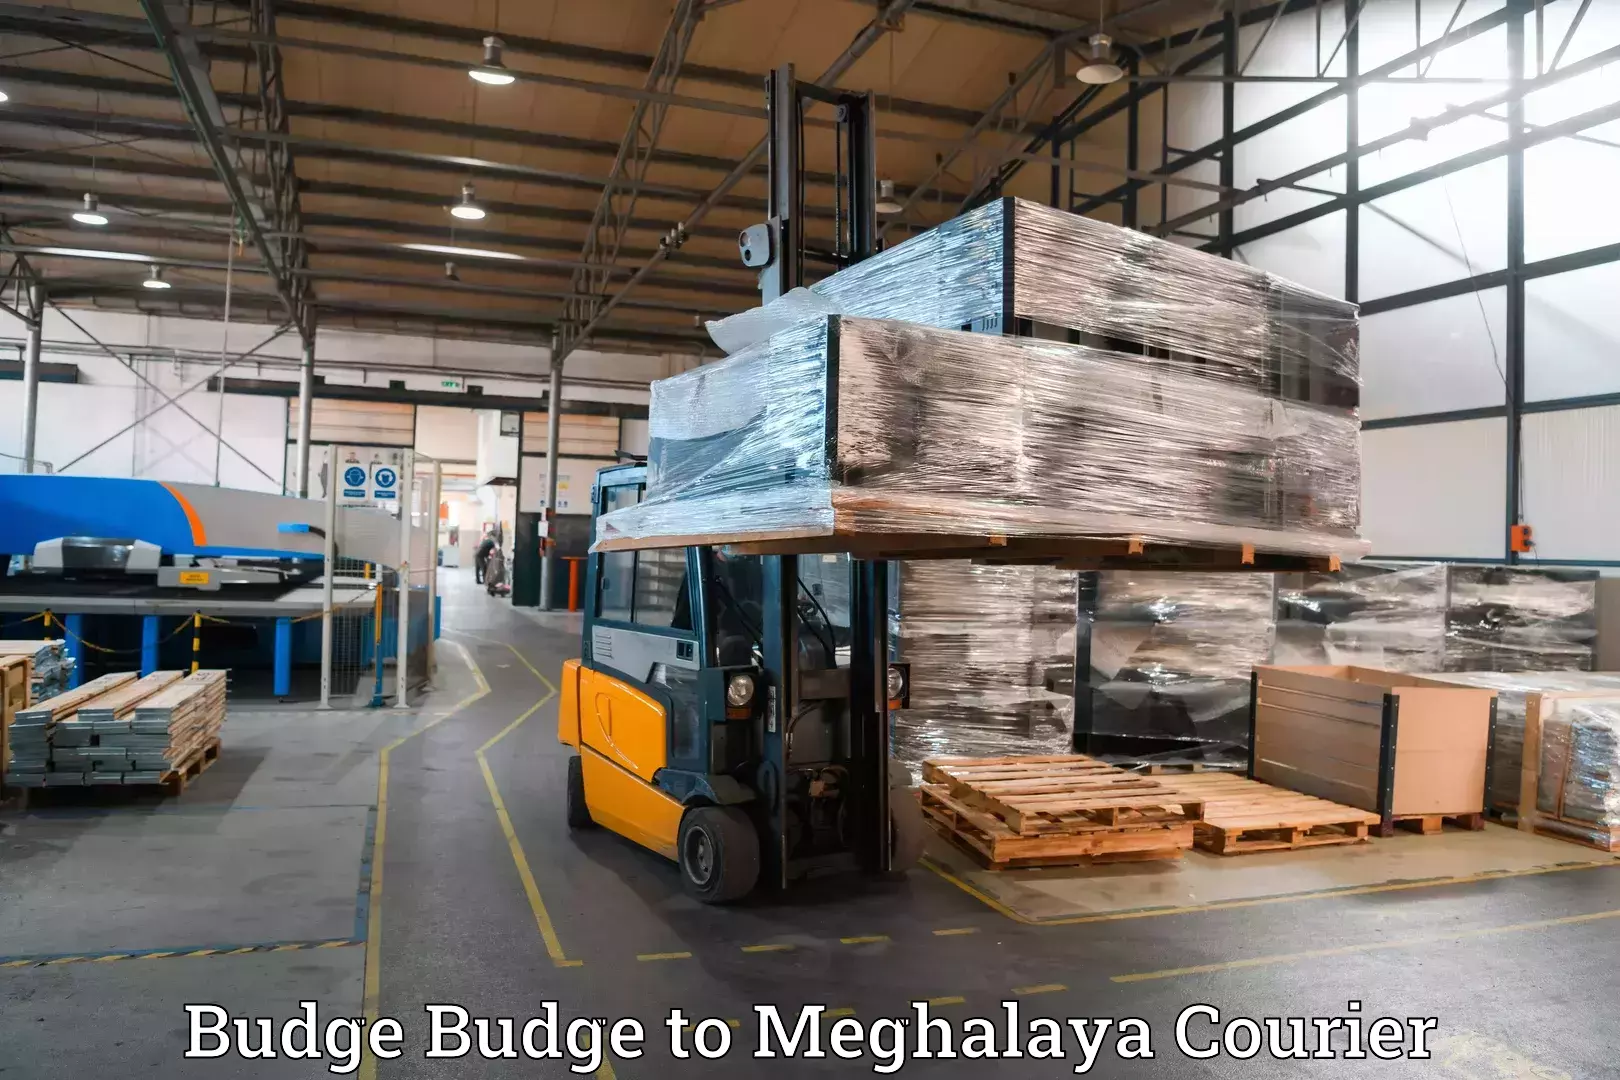 Baggage transport technology Budge Budge to Tura